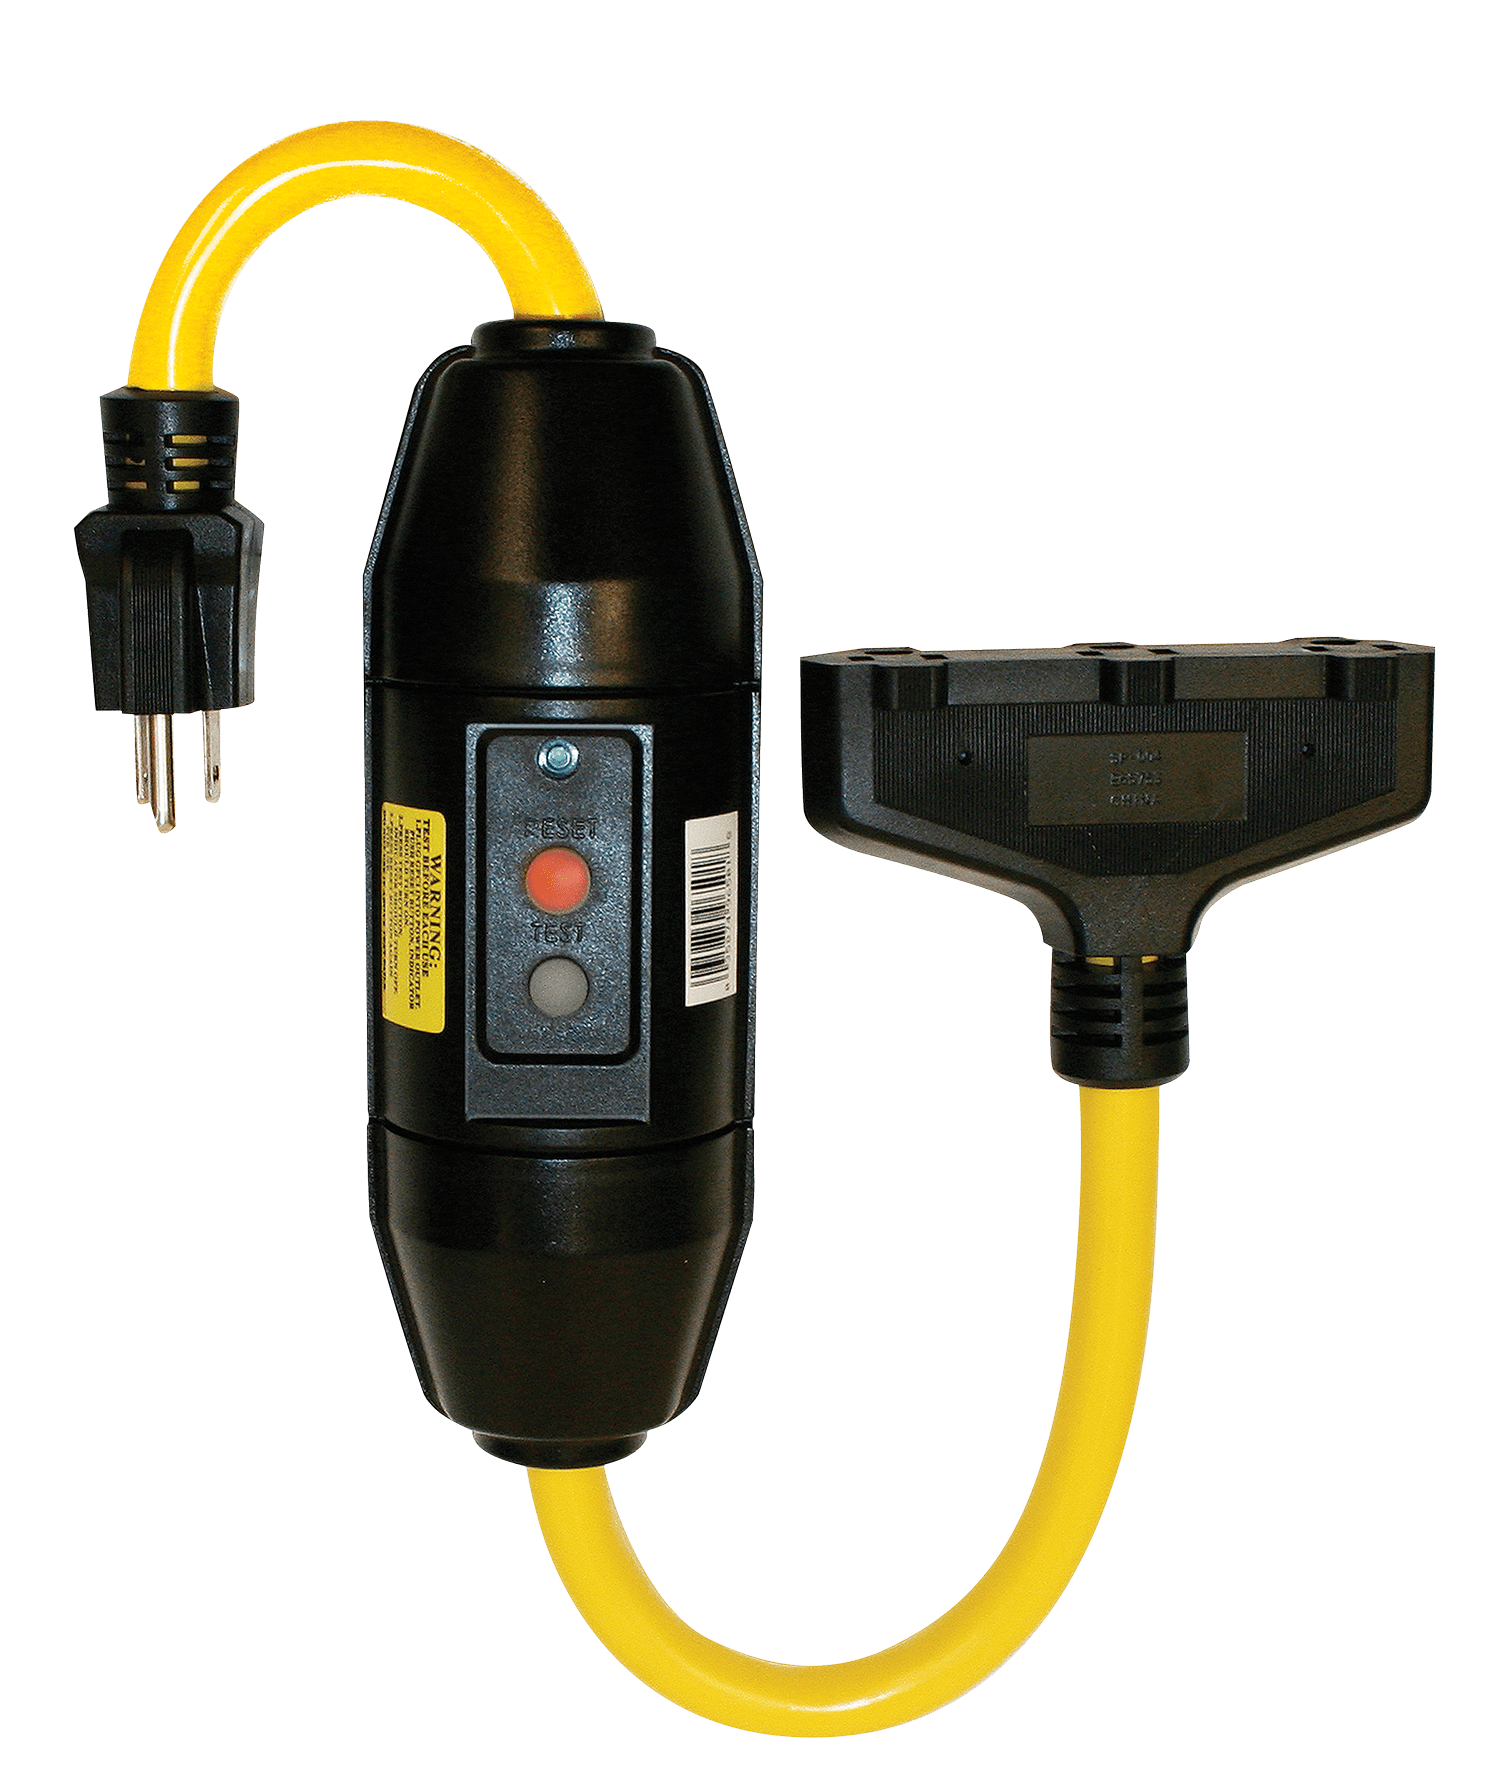 GFCI safety extension cord